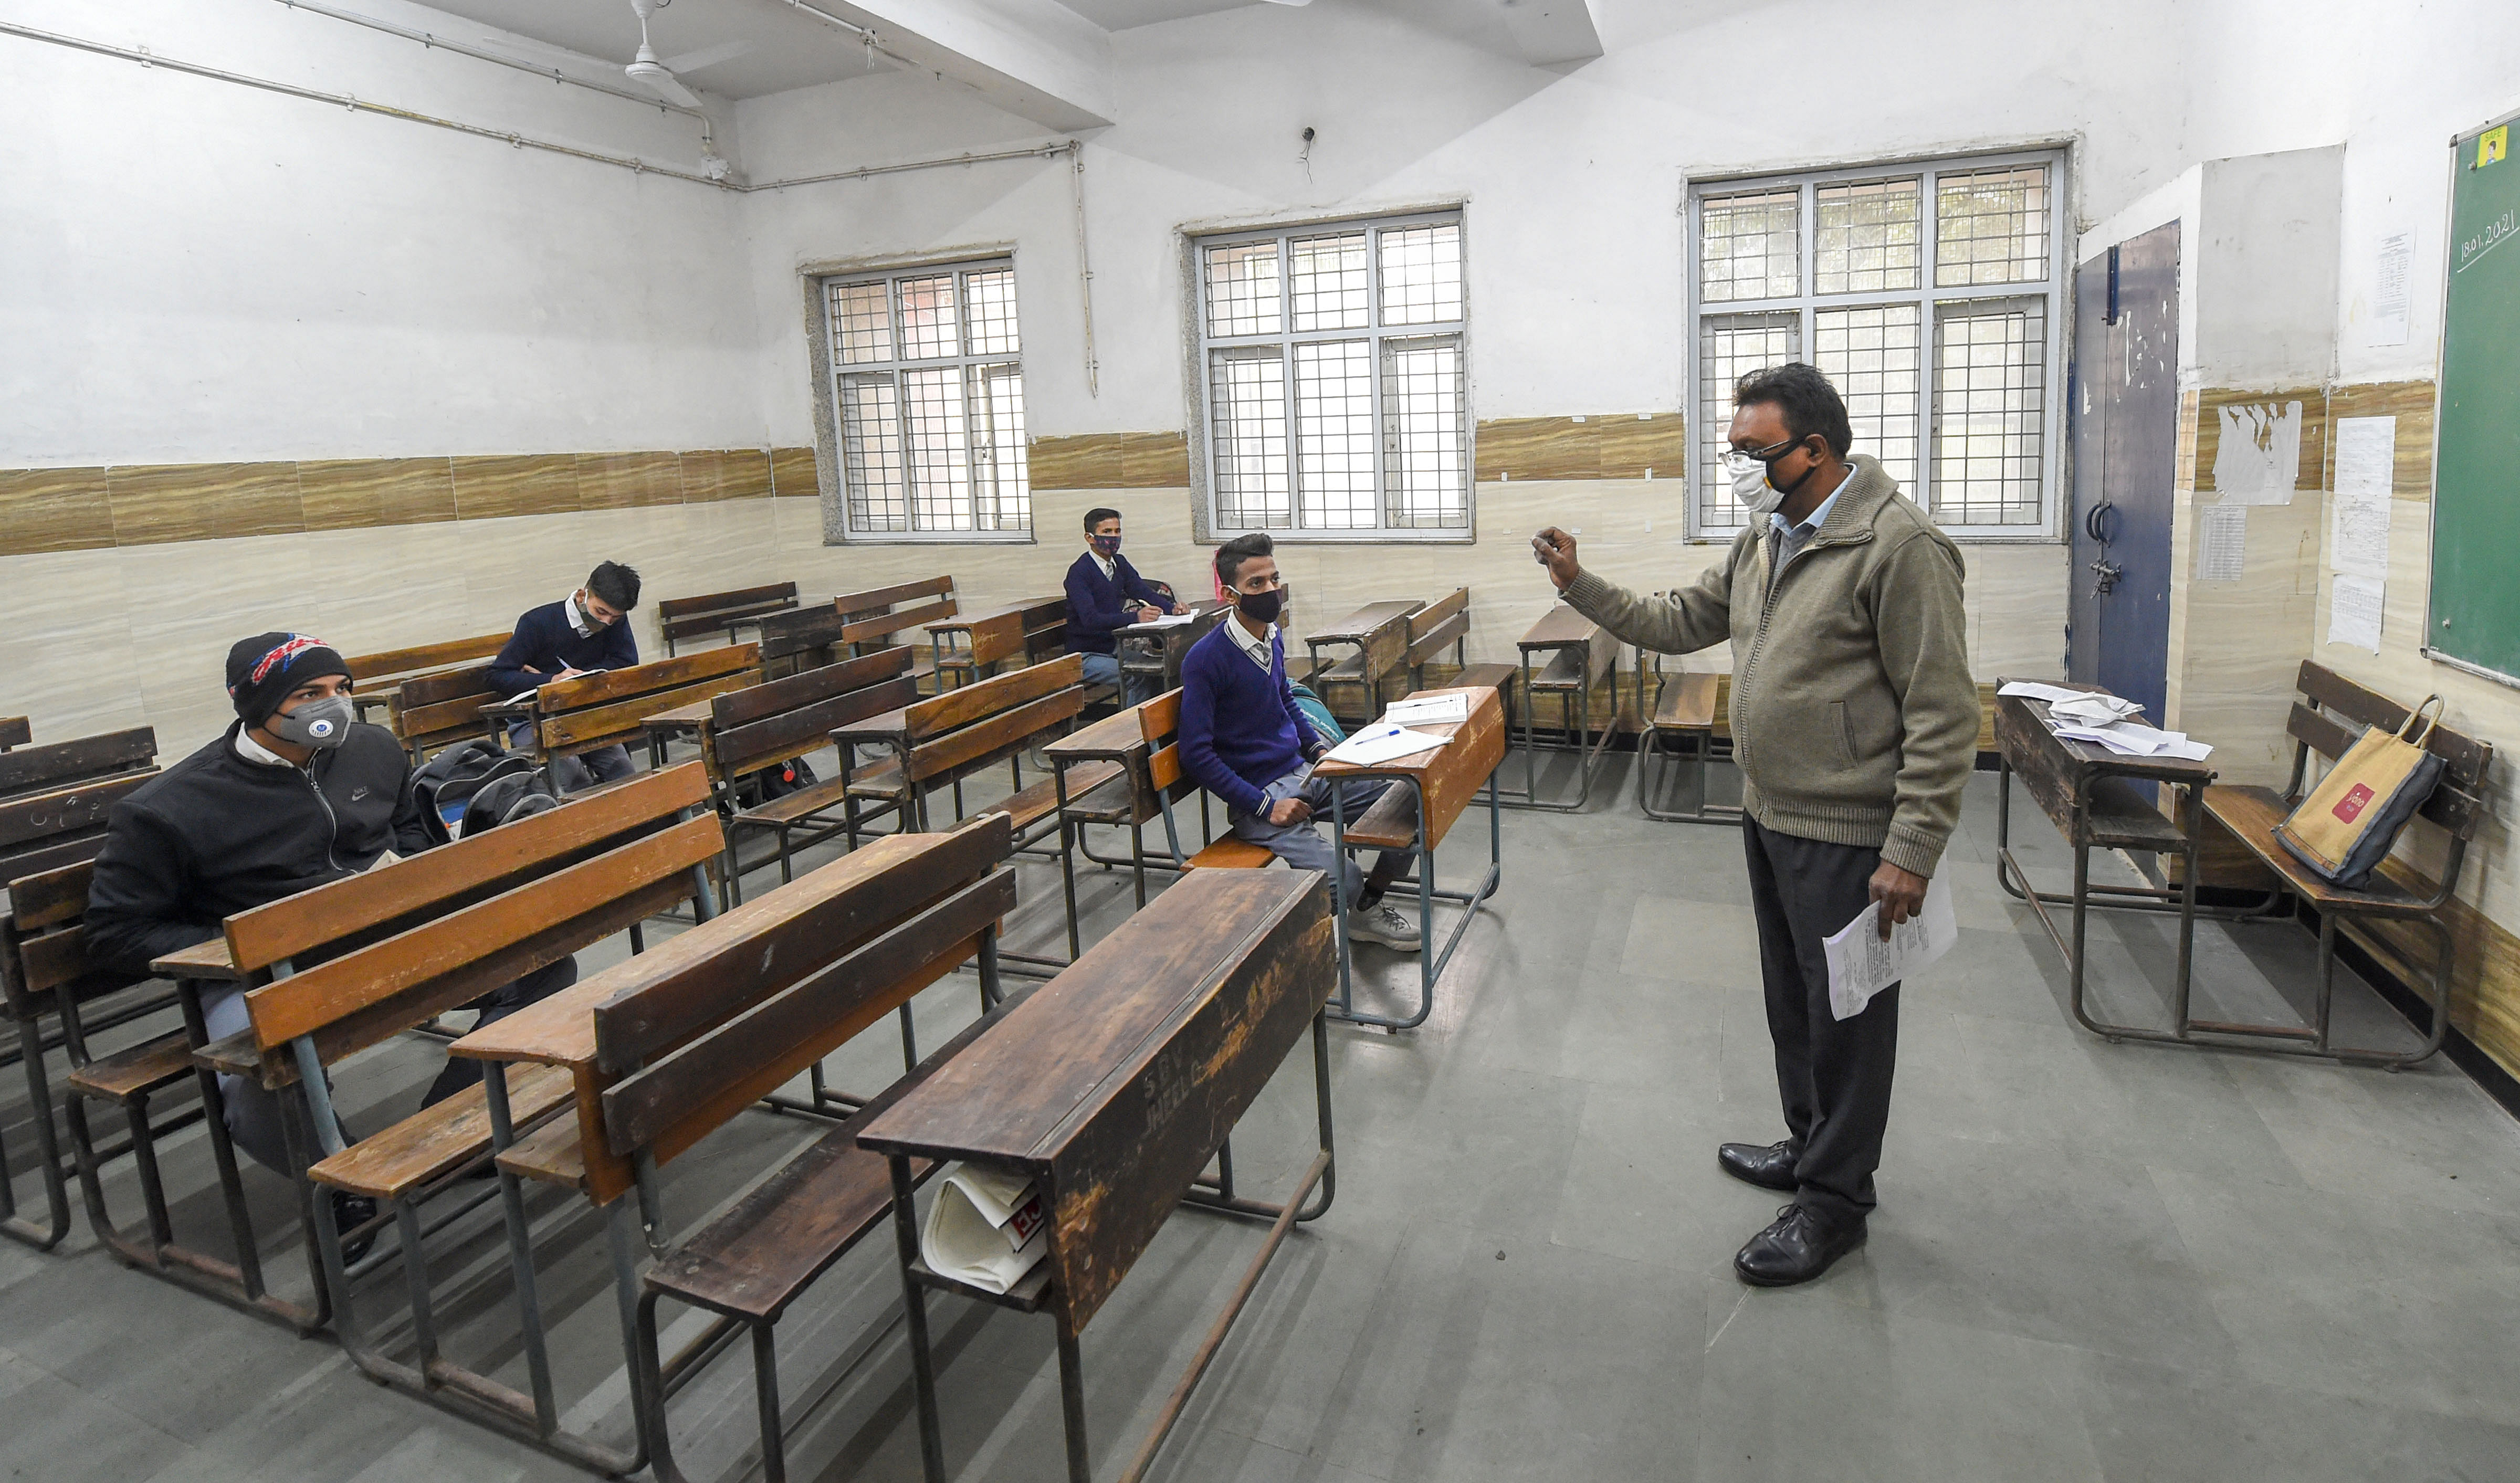 A teacher takes a class at a Rajkiya Sarvodaya Bal Vidyalaya, as schools in the national capital reopened for students of class 10 and 12, after remaining shut since March 19, 2020 due to coronavirus pandemic, in east Delhi, Monday, Jan. 18, 2021. Credit: PTI Photo